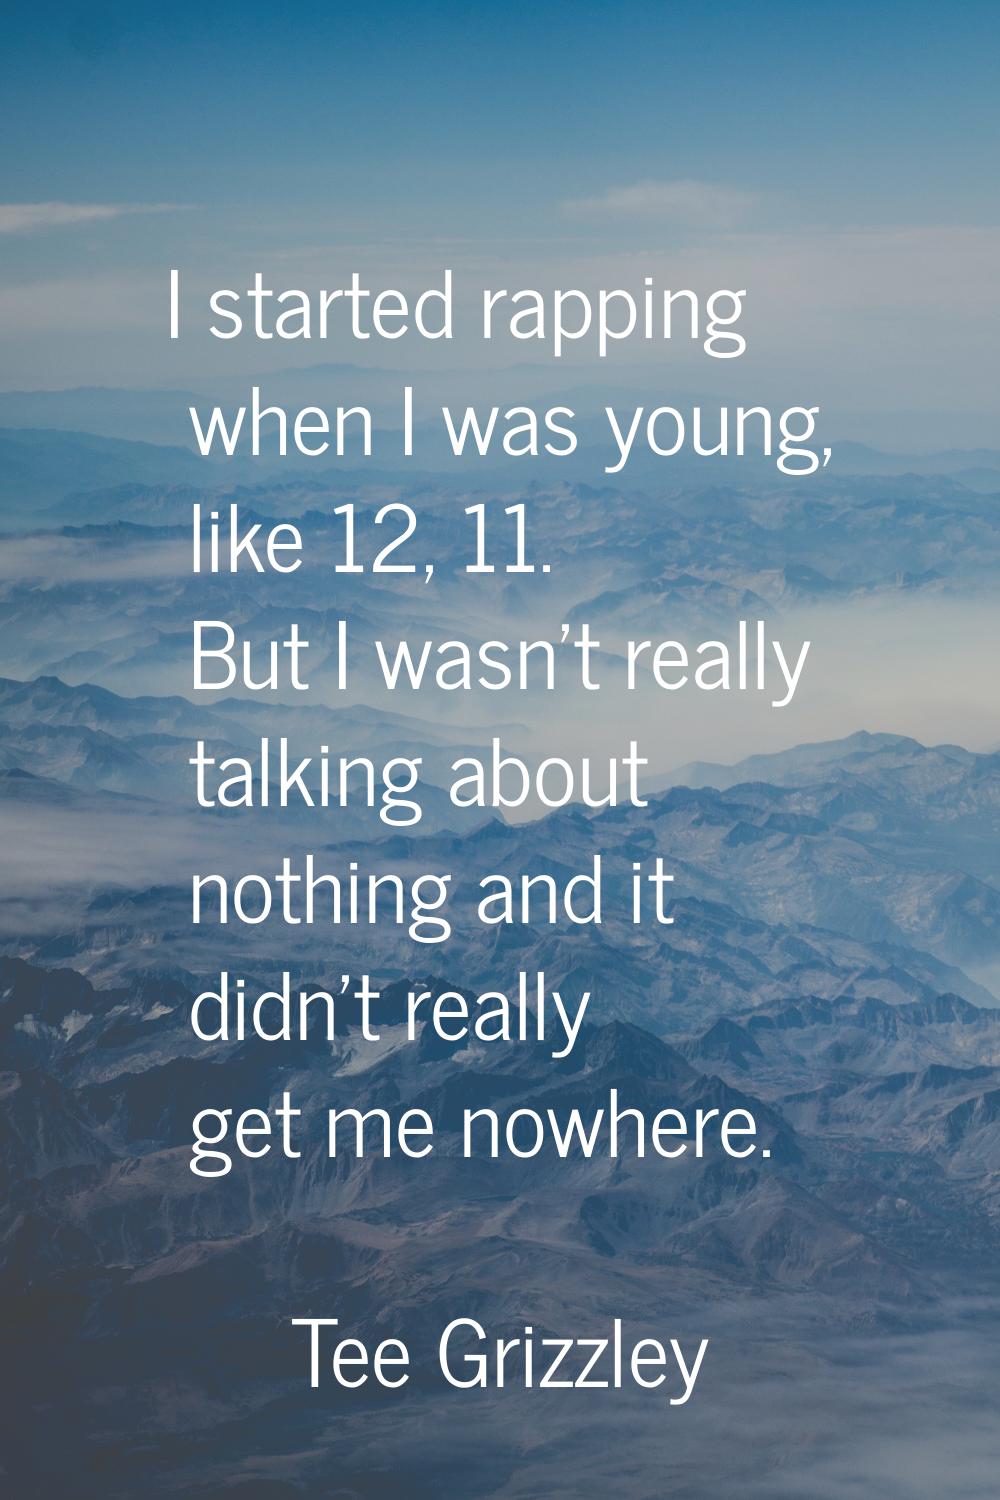 I started rapping when I was young, like 12, 11. But I wasn't really talking about nothing and it d